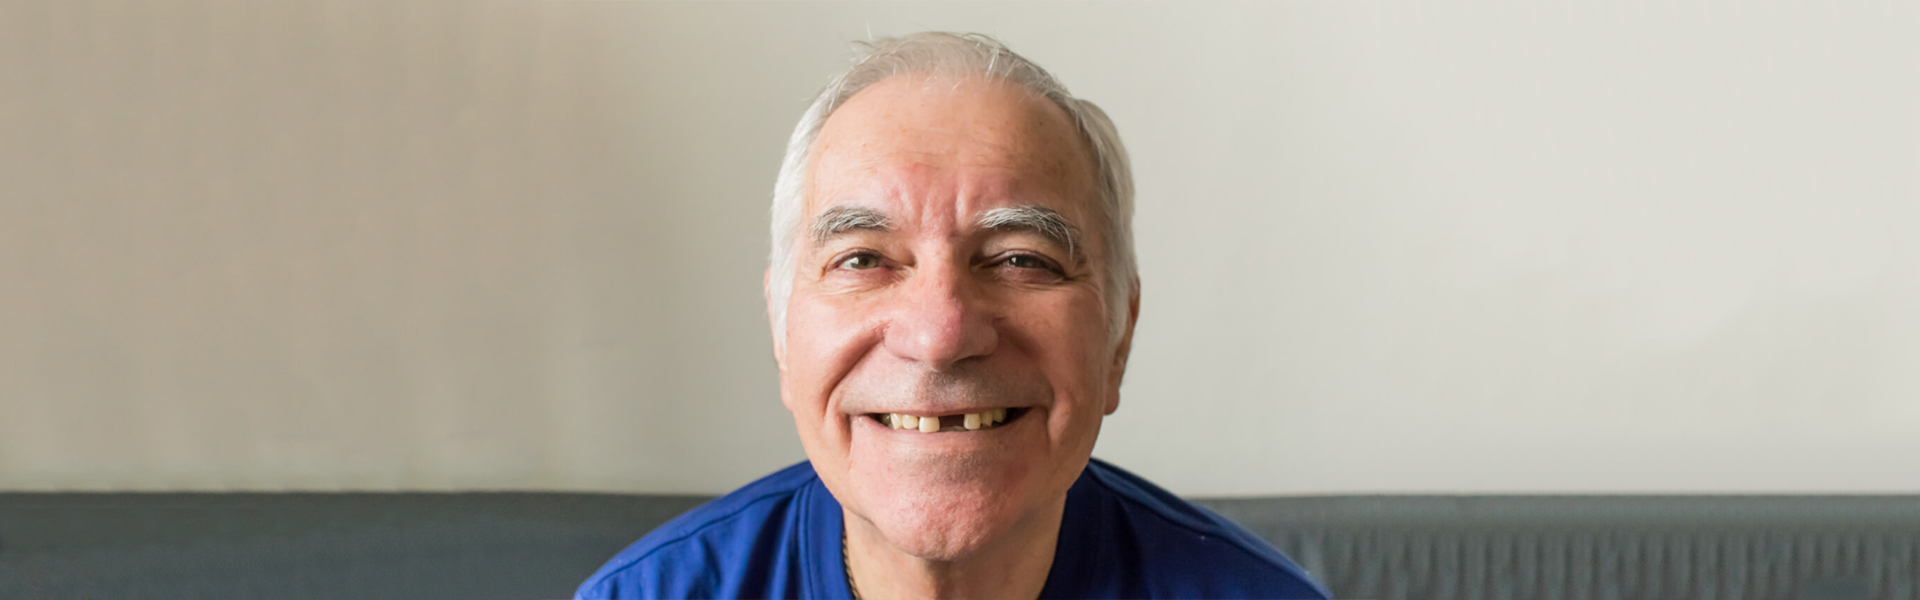 Why People with Missing Teeth Need Dental Implants